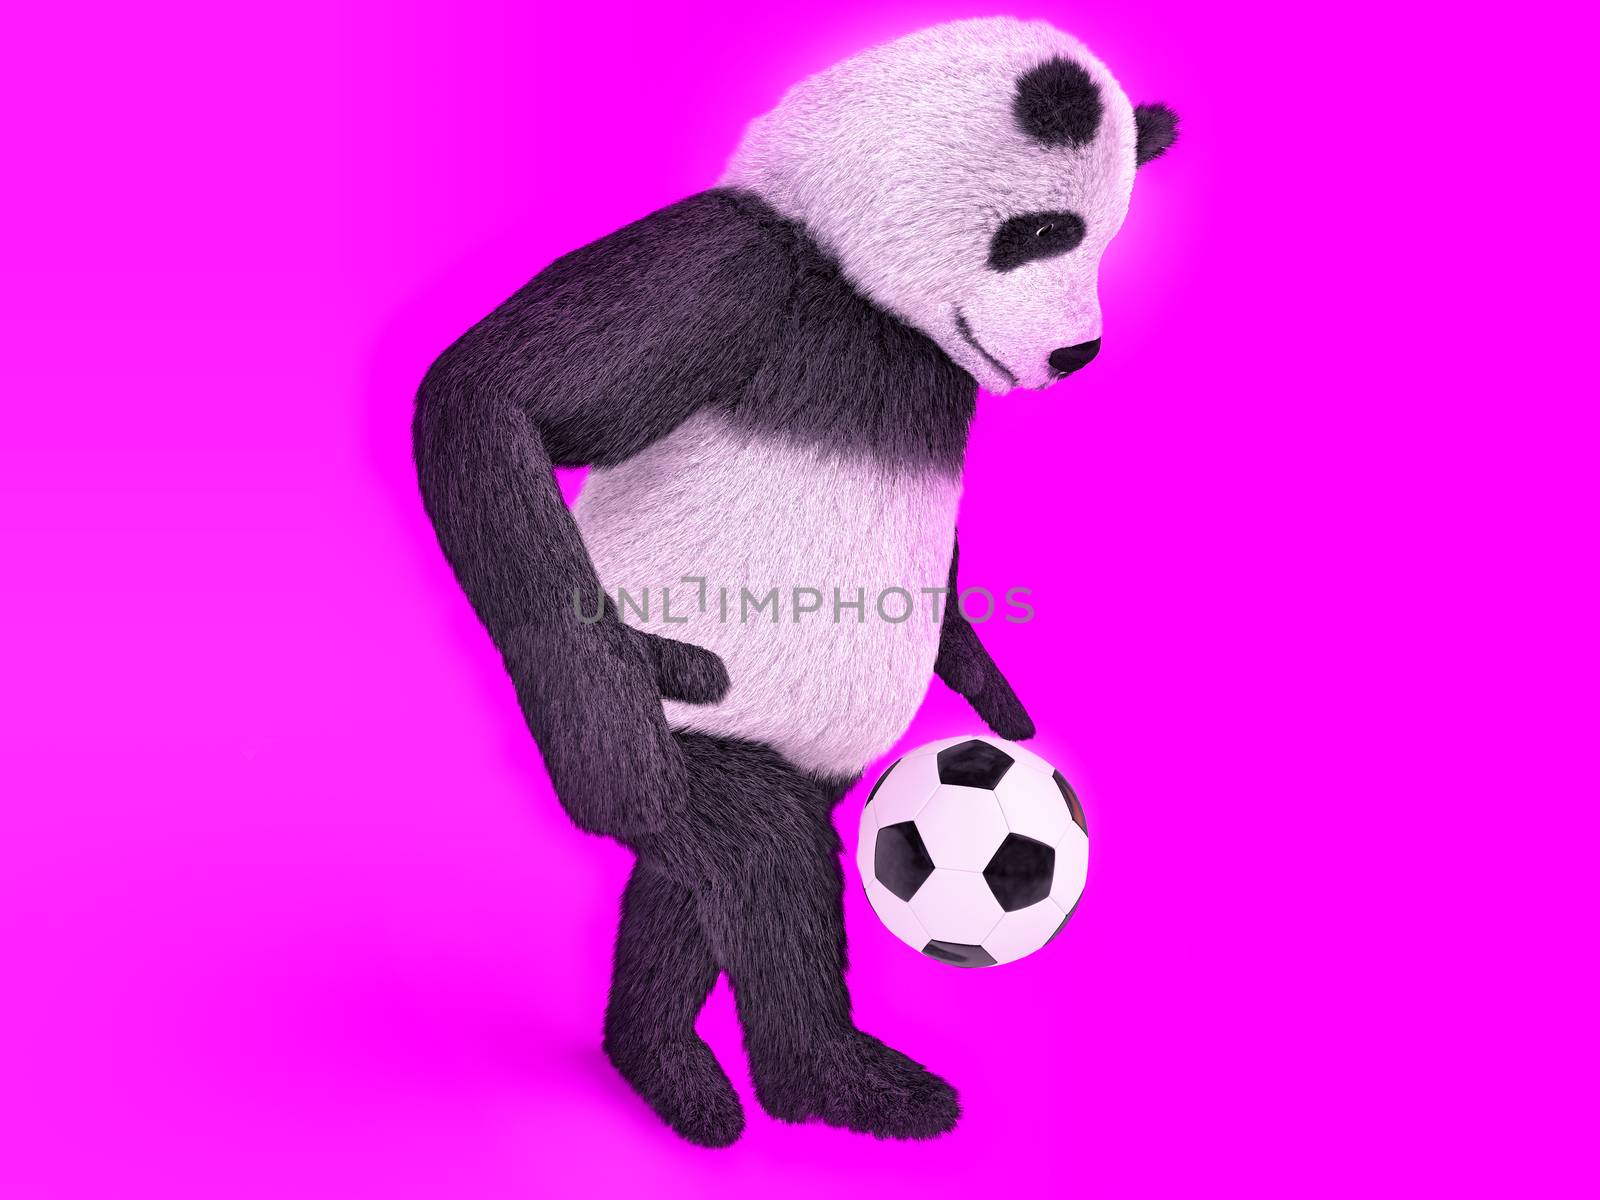 touching cute panda soccer player. chasing a soccer ball on foot on purple background. juggling ball bear. by xtate